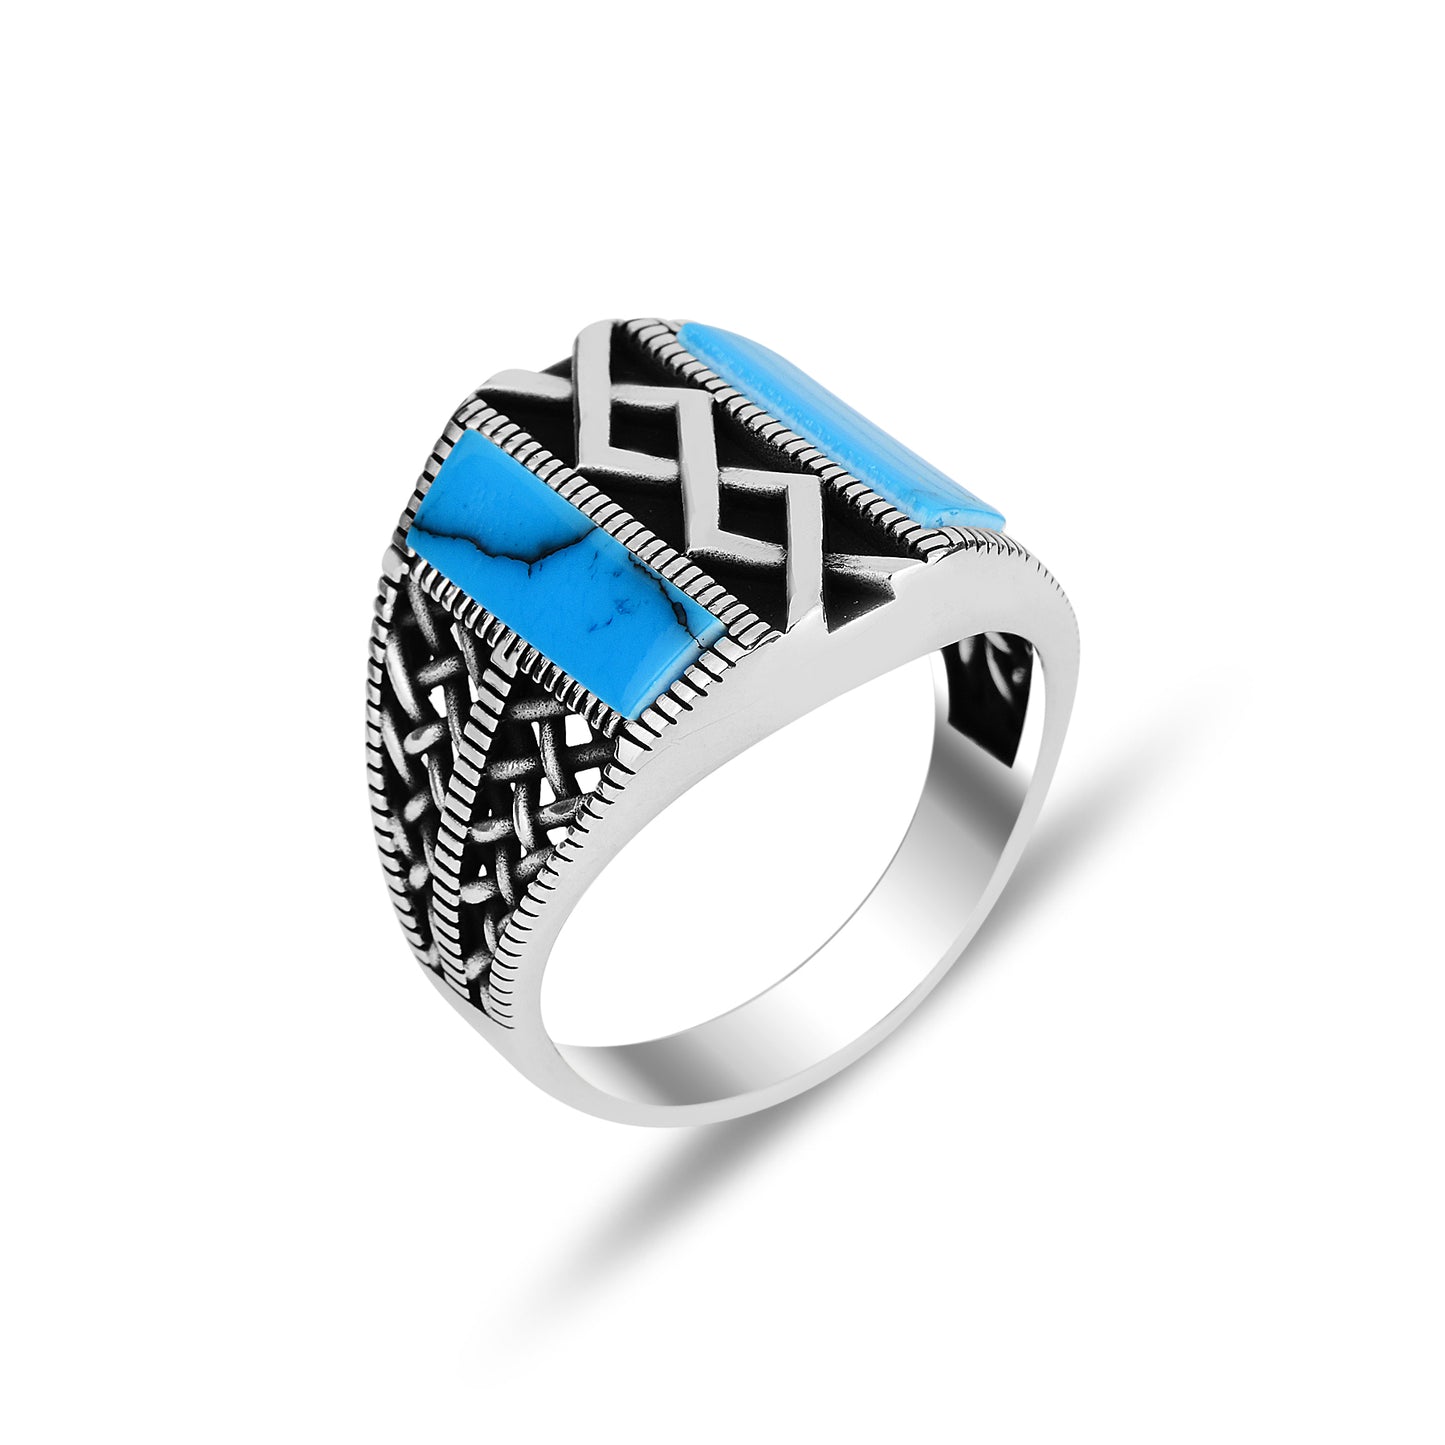 Silver Handmade Patterned Turquoise Stone Ring